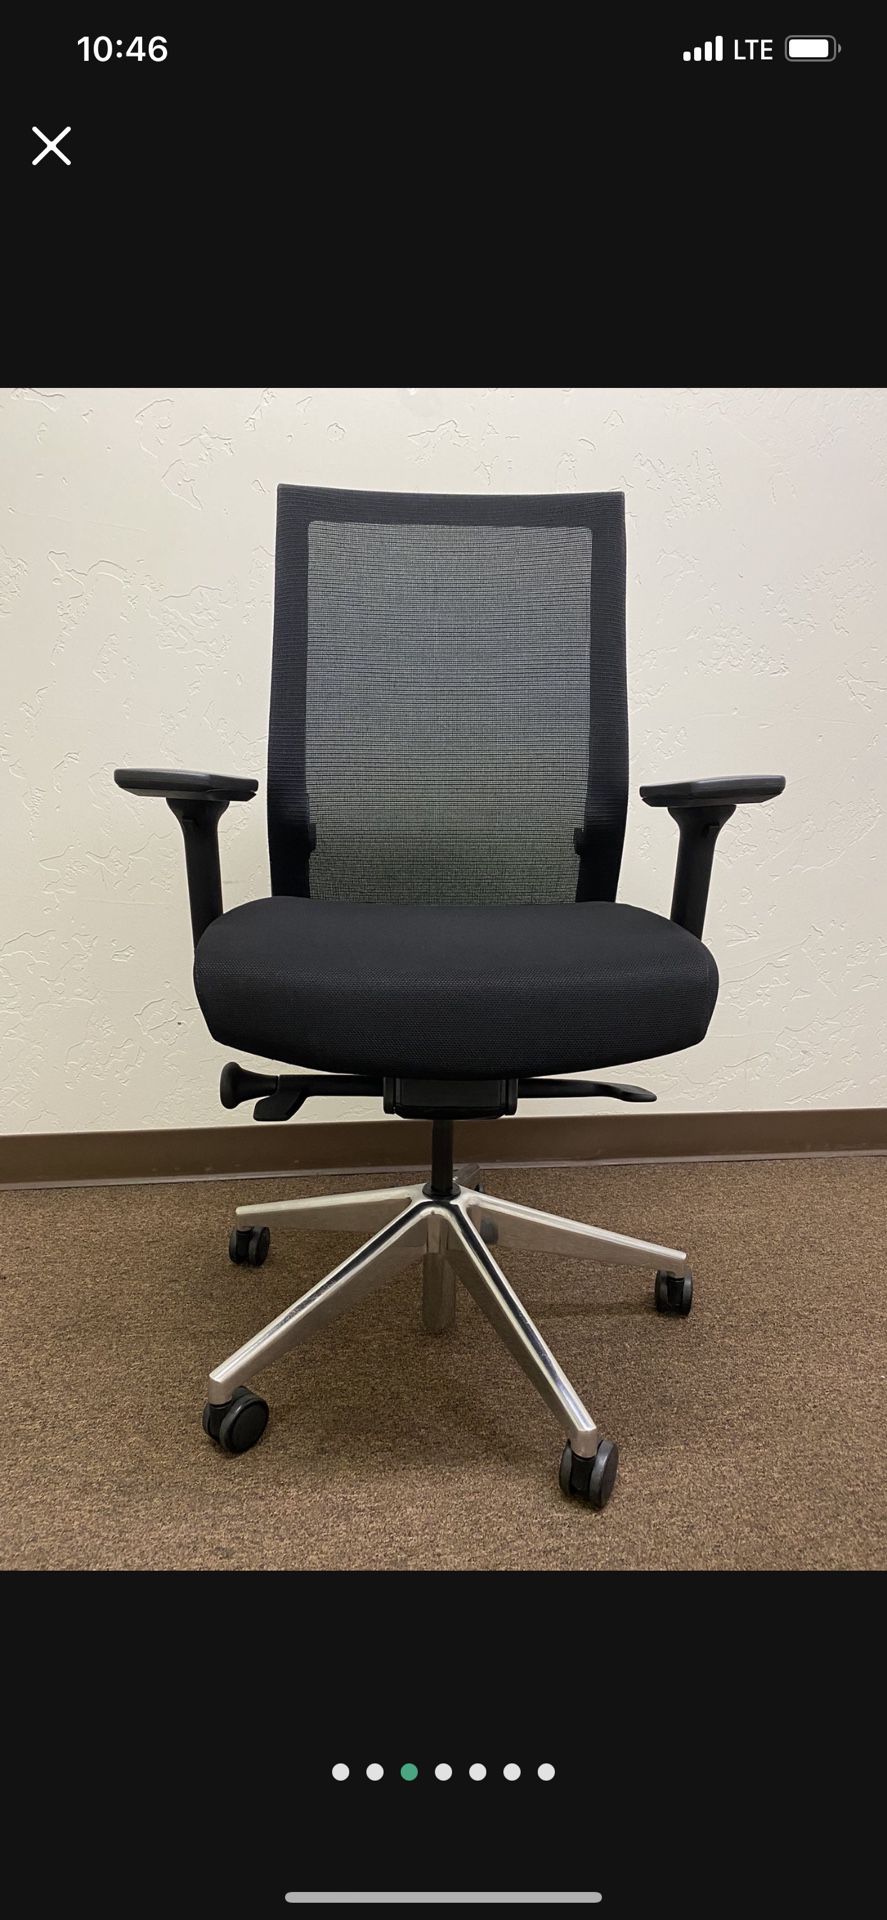 Steelcase AMQ high mesh back office chair in black